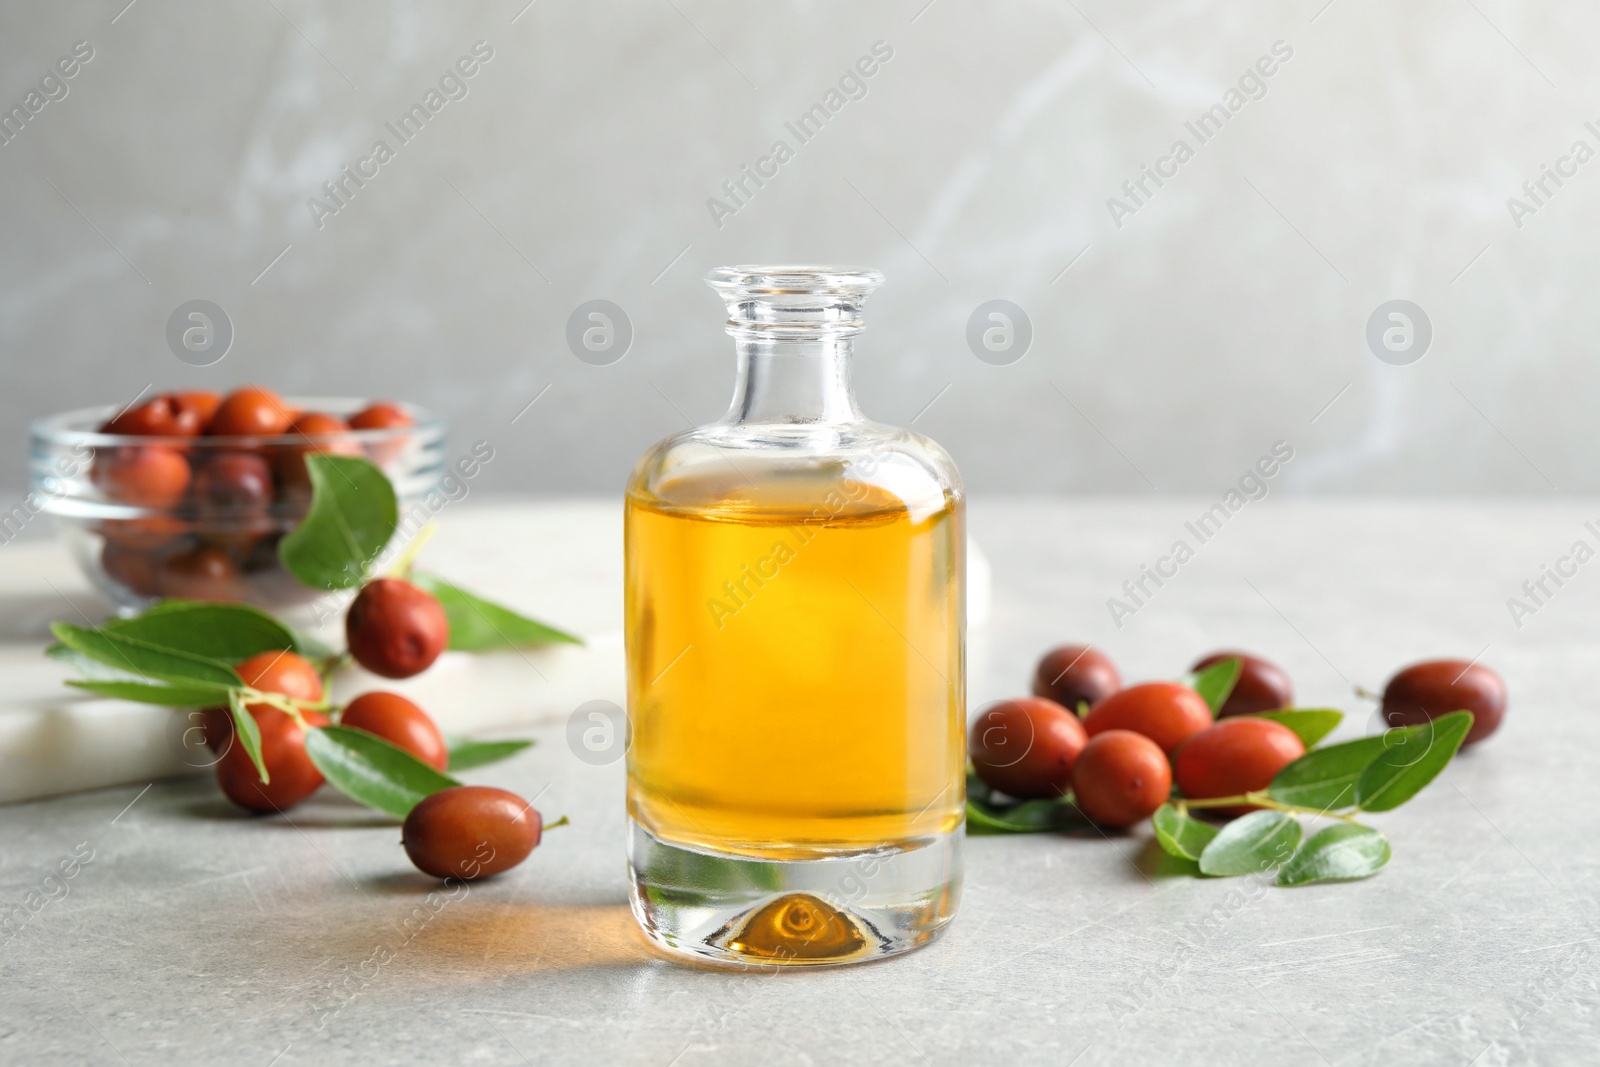 Photo of Jojoba oil in glass bottle and seeds on light grey table